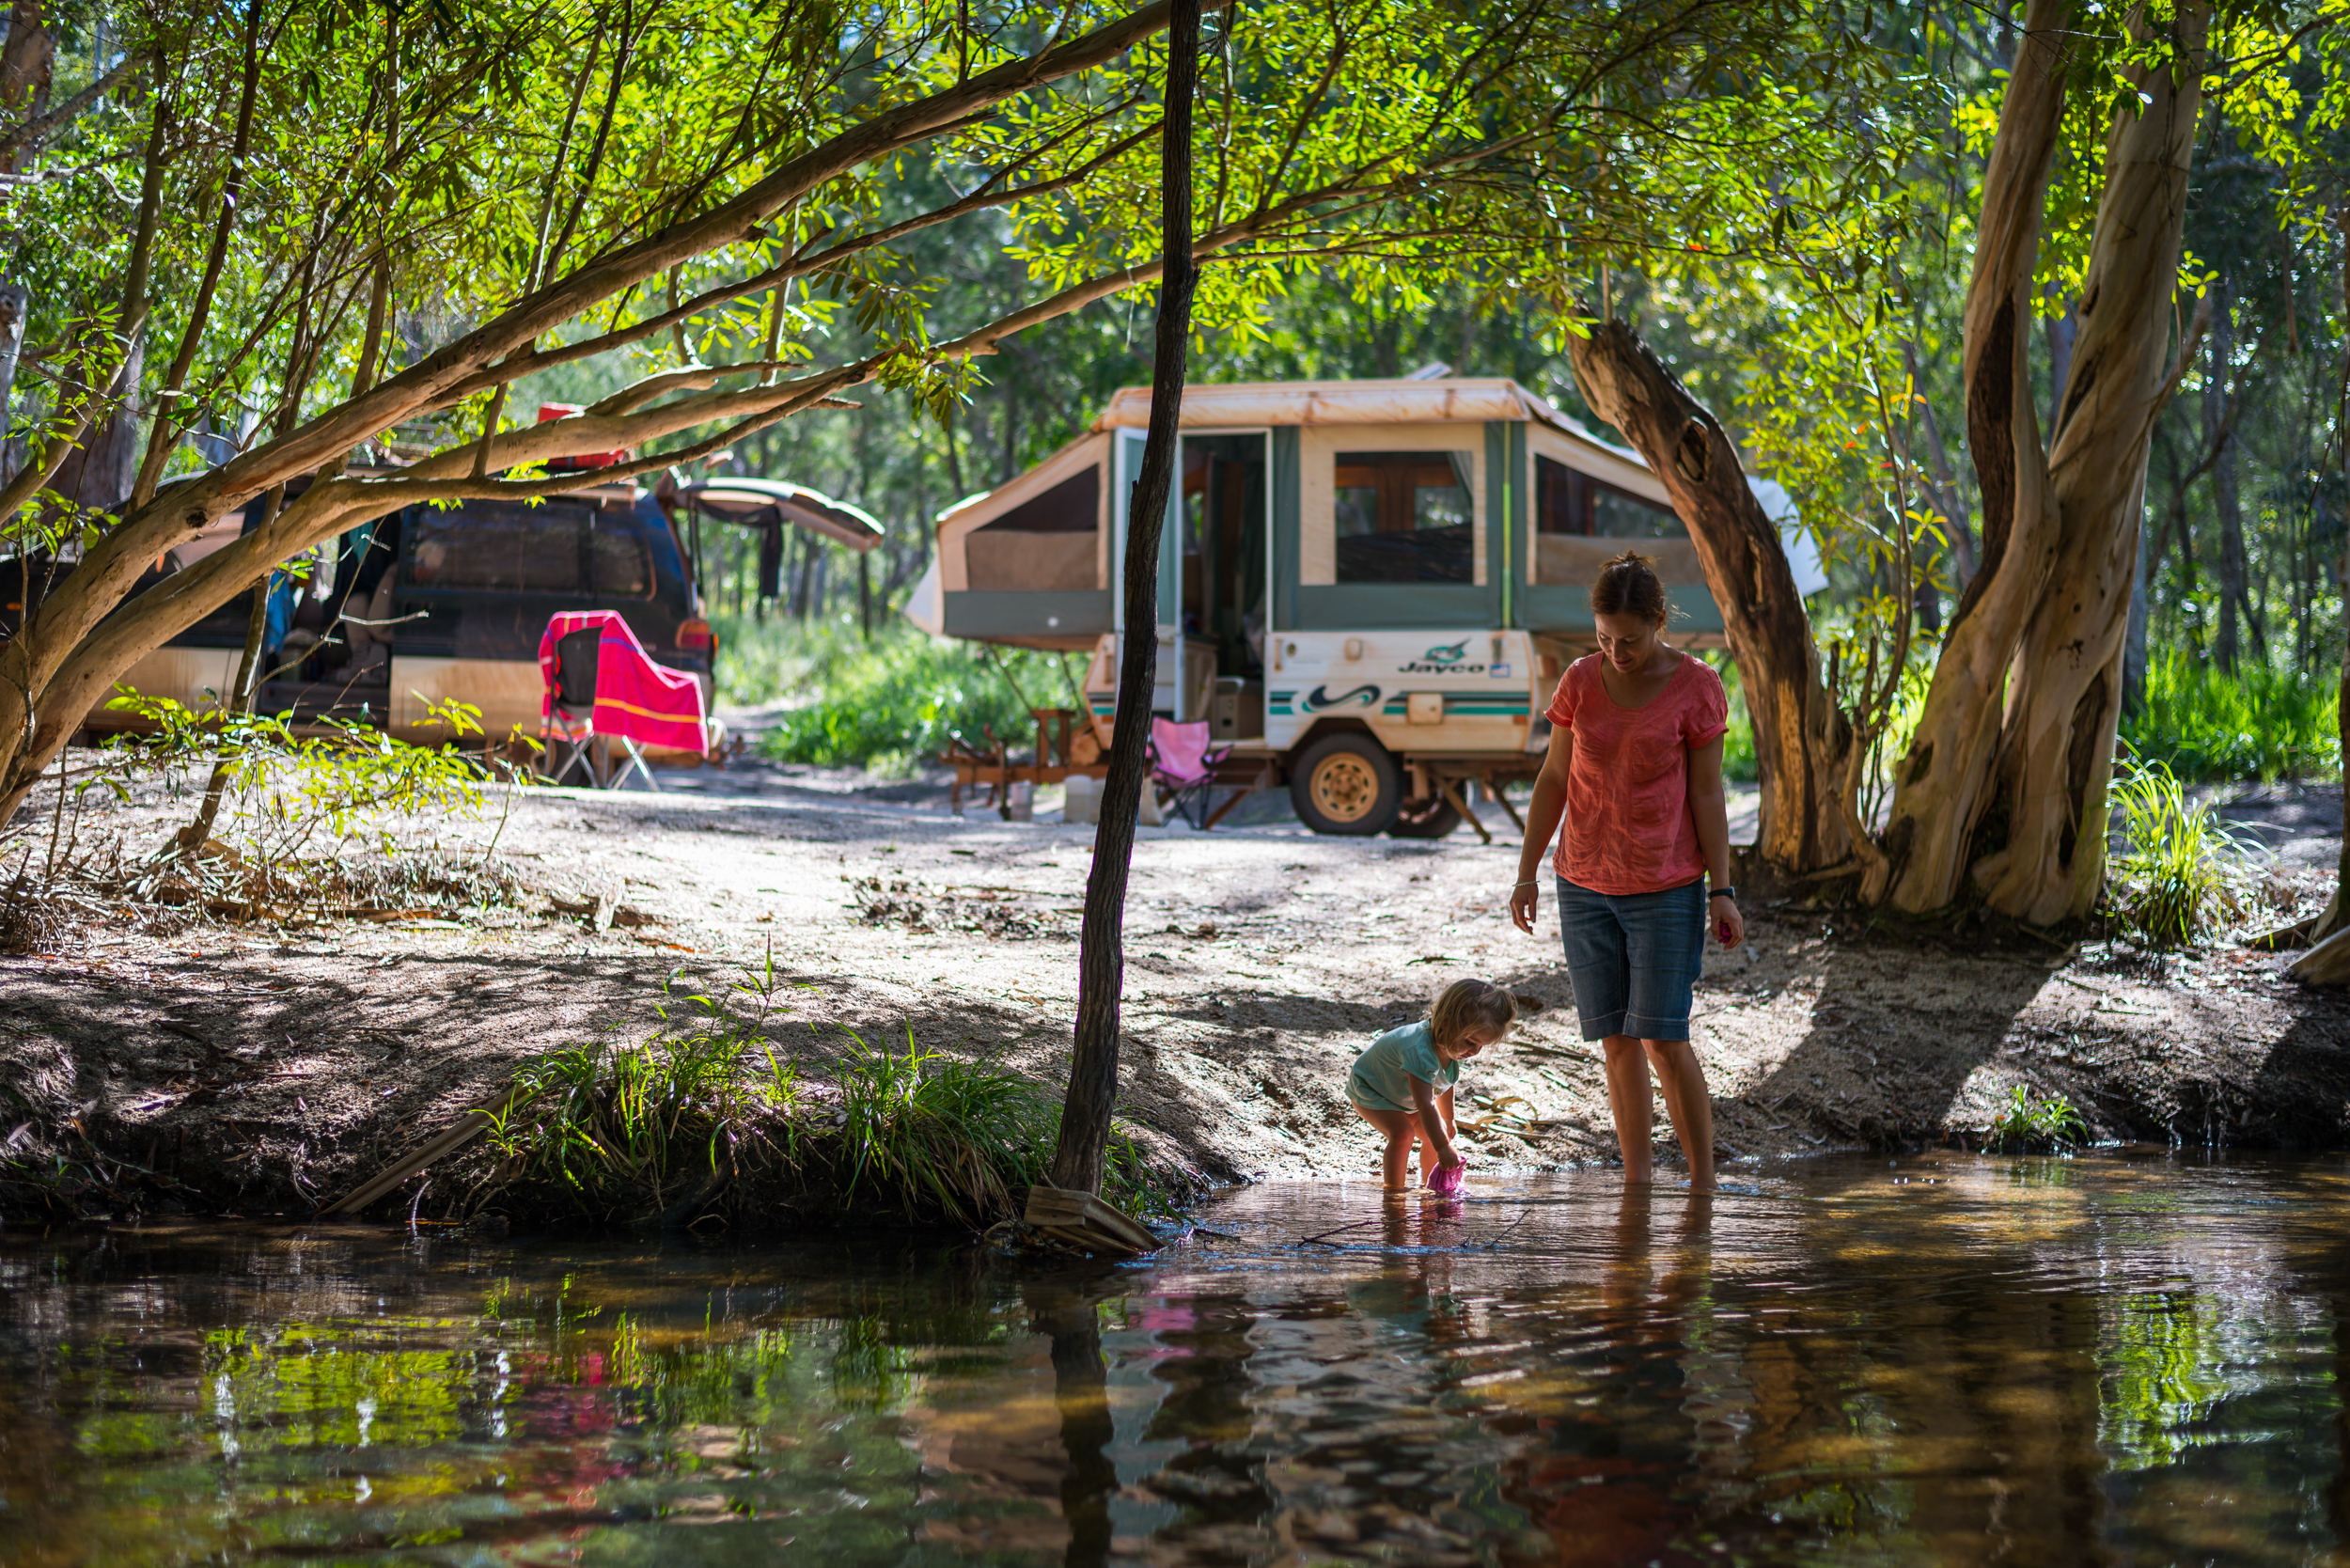 Girl playing in the water while her mum watches at a camping site